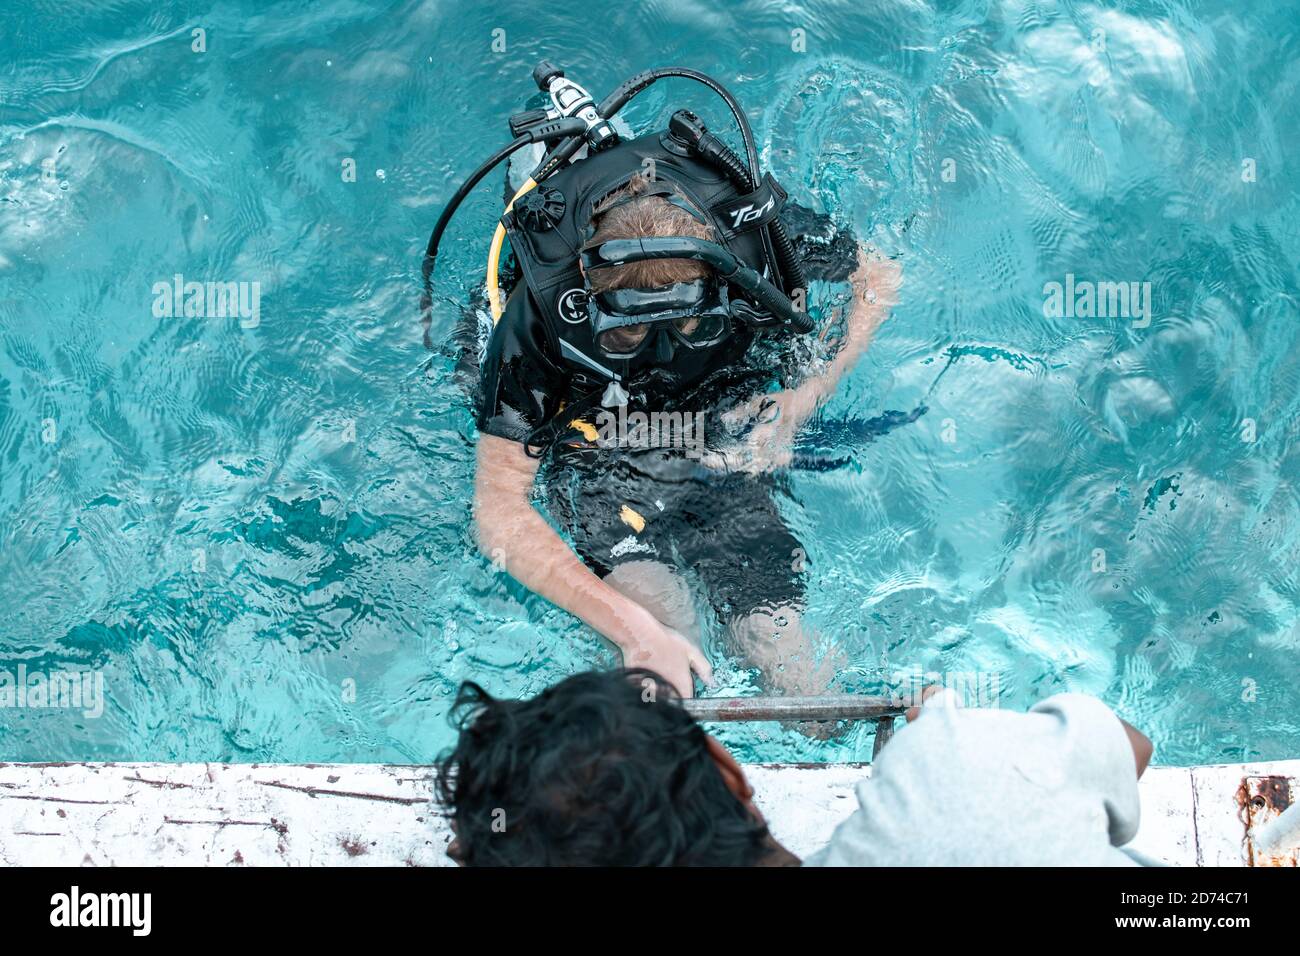 Calventuras islands, Ngwesaung, Myanmar, December 29, 2019: A scuba diver in full equipment at the turquoise water surface Stock Photo